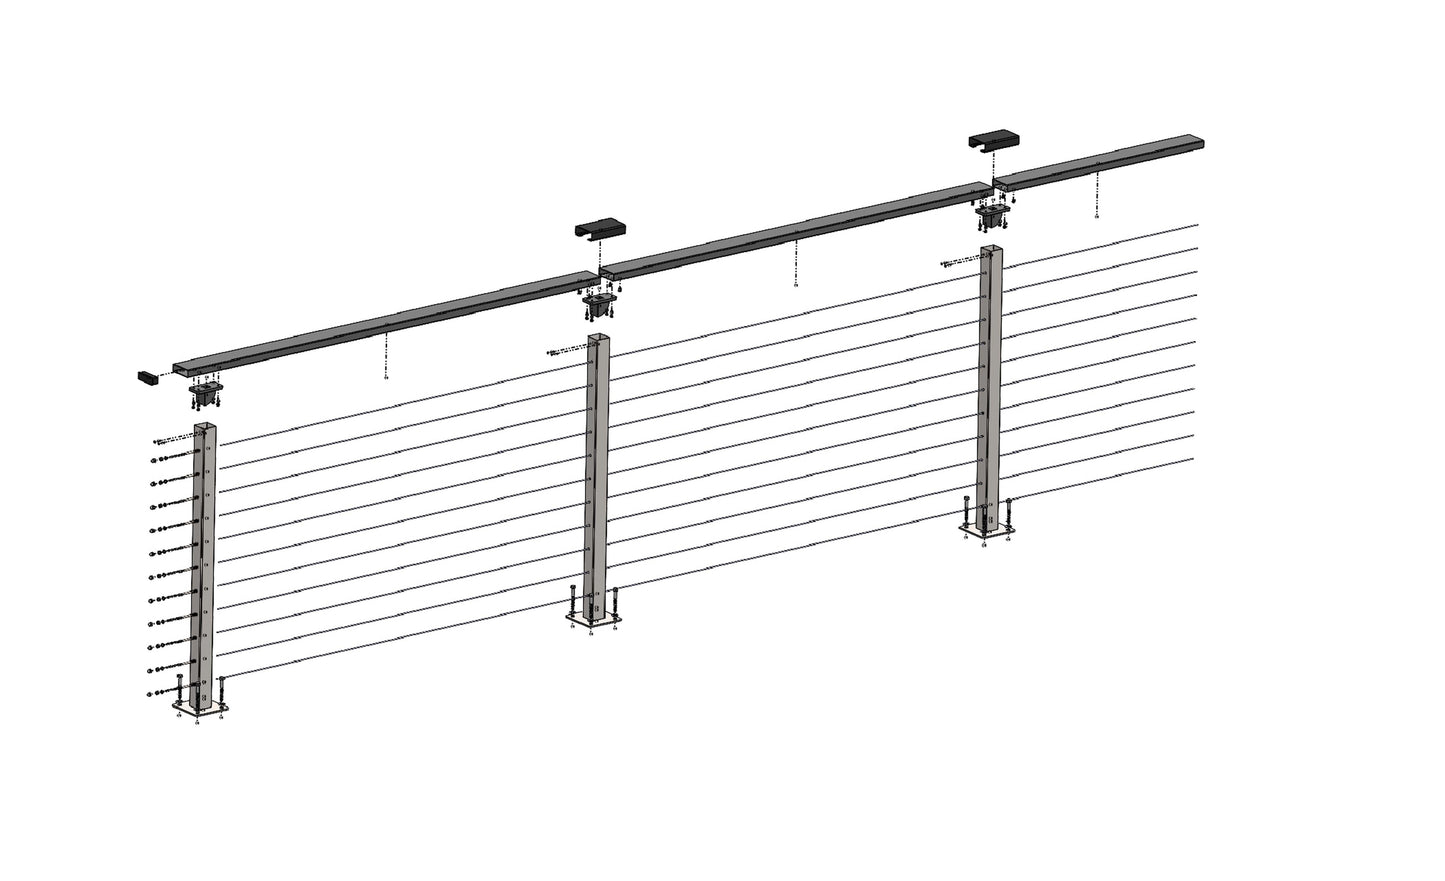 39 ft. Black Deck Cable Railing, 36 in. Base Mount , Stainless